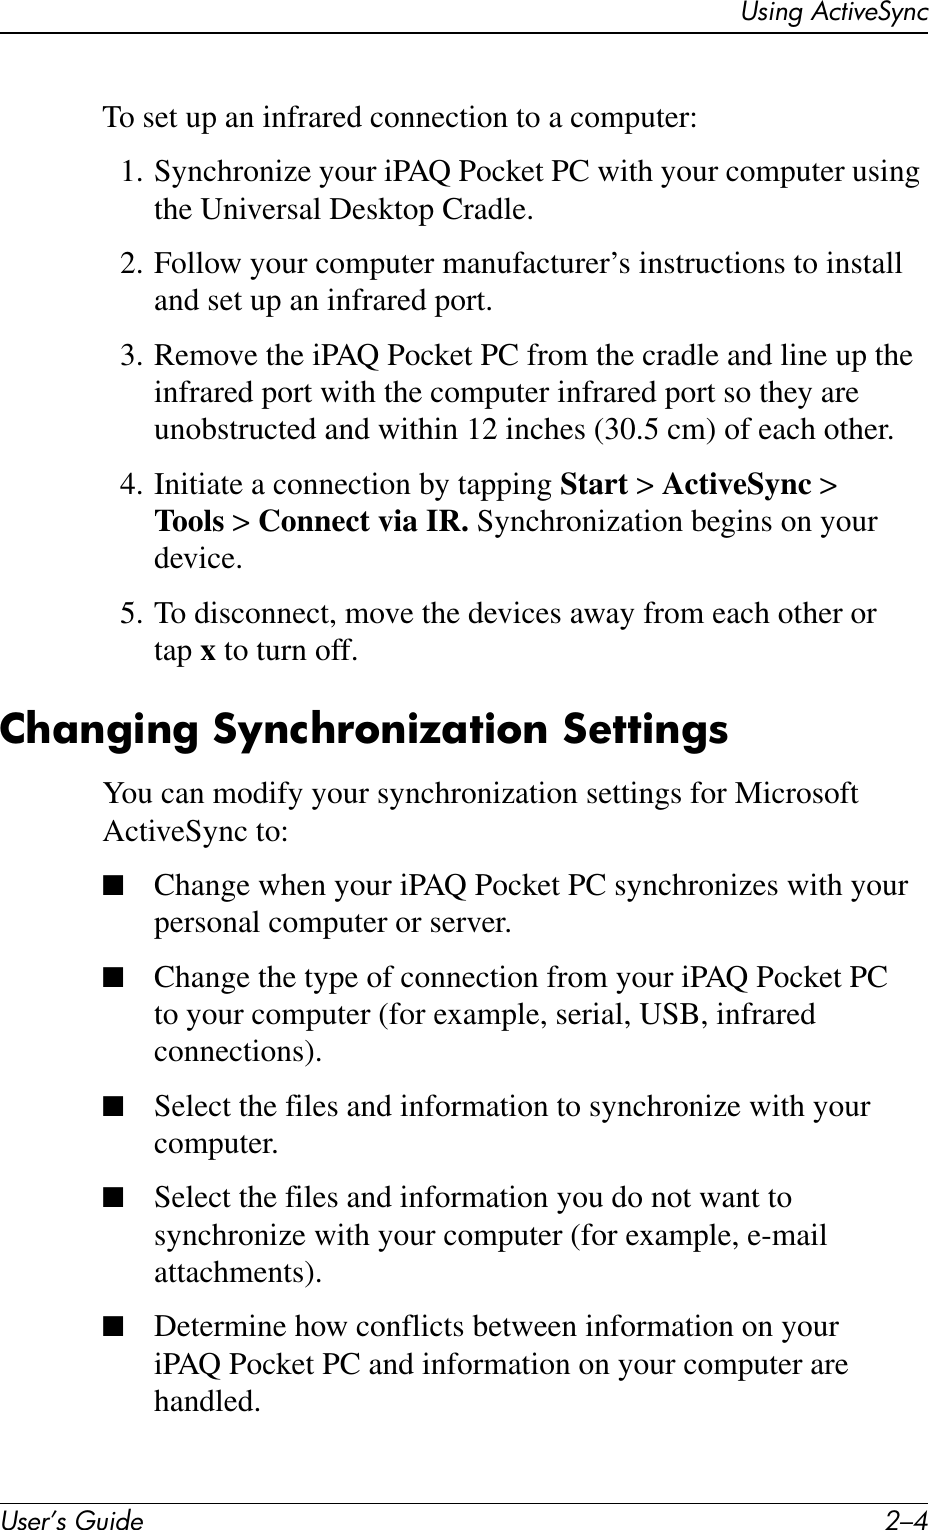 User’s Guide 2–4Using ActiveSyncTo set up an infrared connection to a computer:1. Synchronize your iPAQ Pocket PC with your computer using the Universal Desktop Cradle.2. Follow your computer manufacturer’s instructions to install and set up an infrared port.3. Remove the iPAQ Pocket PC from the cradle and line up the infrared port with the computer infrared port so they are unobstructed and within 12 inches (30.5 cm) of each other.4. Initiate a connection by tapping Start &gt; ActiveSync &gt; Tools &gt; Connect via IR. Synchronization begins on your device.5. To disconnect, move the devices away from each other or tap x to turn off.Changing Synchronization SettingsYou can modify your synchronization settings for Microsoft ActiveSync to:■Change when your iPAQ Pocket PC synchronizes with your personal computer or server.■Change the type of connection from your iPAQ Pocket PC to your computer (for example, serial, USB, infrared connections).■Select the files and information to synchronize with your computer.■Select the files and information you do not want to synchronize with your computer (for example, e-mail attachments).■Determine how conflicts between information on your iPAQ Pocket PC and information on your computer are handled.